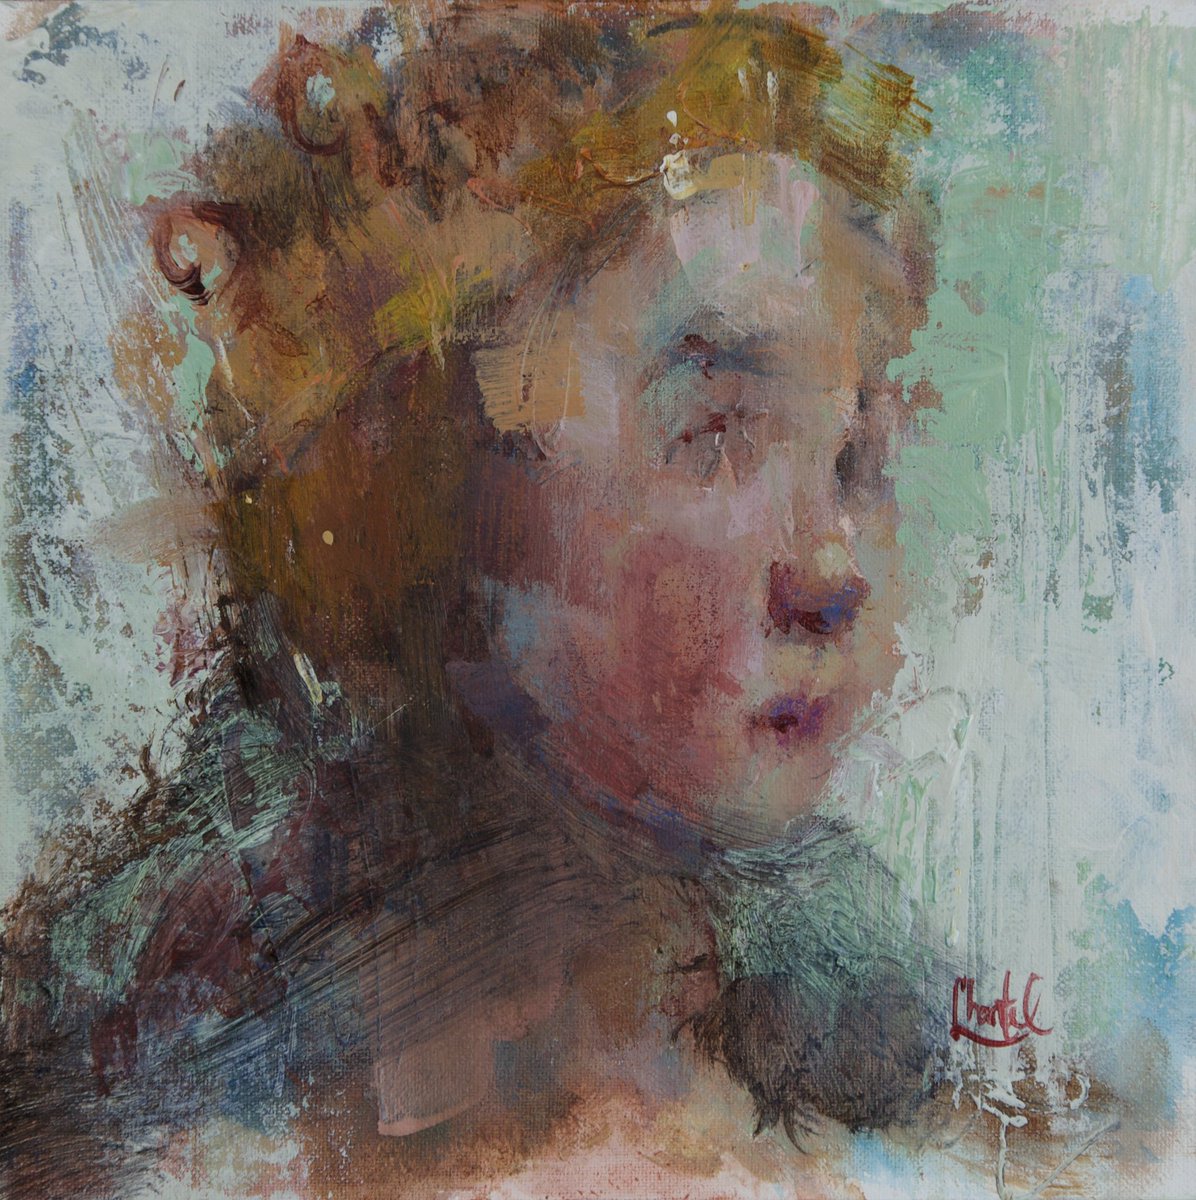 “Homemade Crown” 6x6 inches
acrylic on panel
. . . 

#artgallery #fineart #chantelbarber #artcollector #artcollectors #art #acrylicpainting #modernimpressionist #modernimpressionism #artist